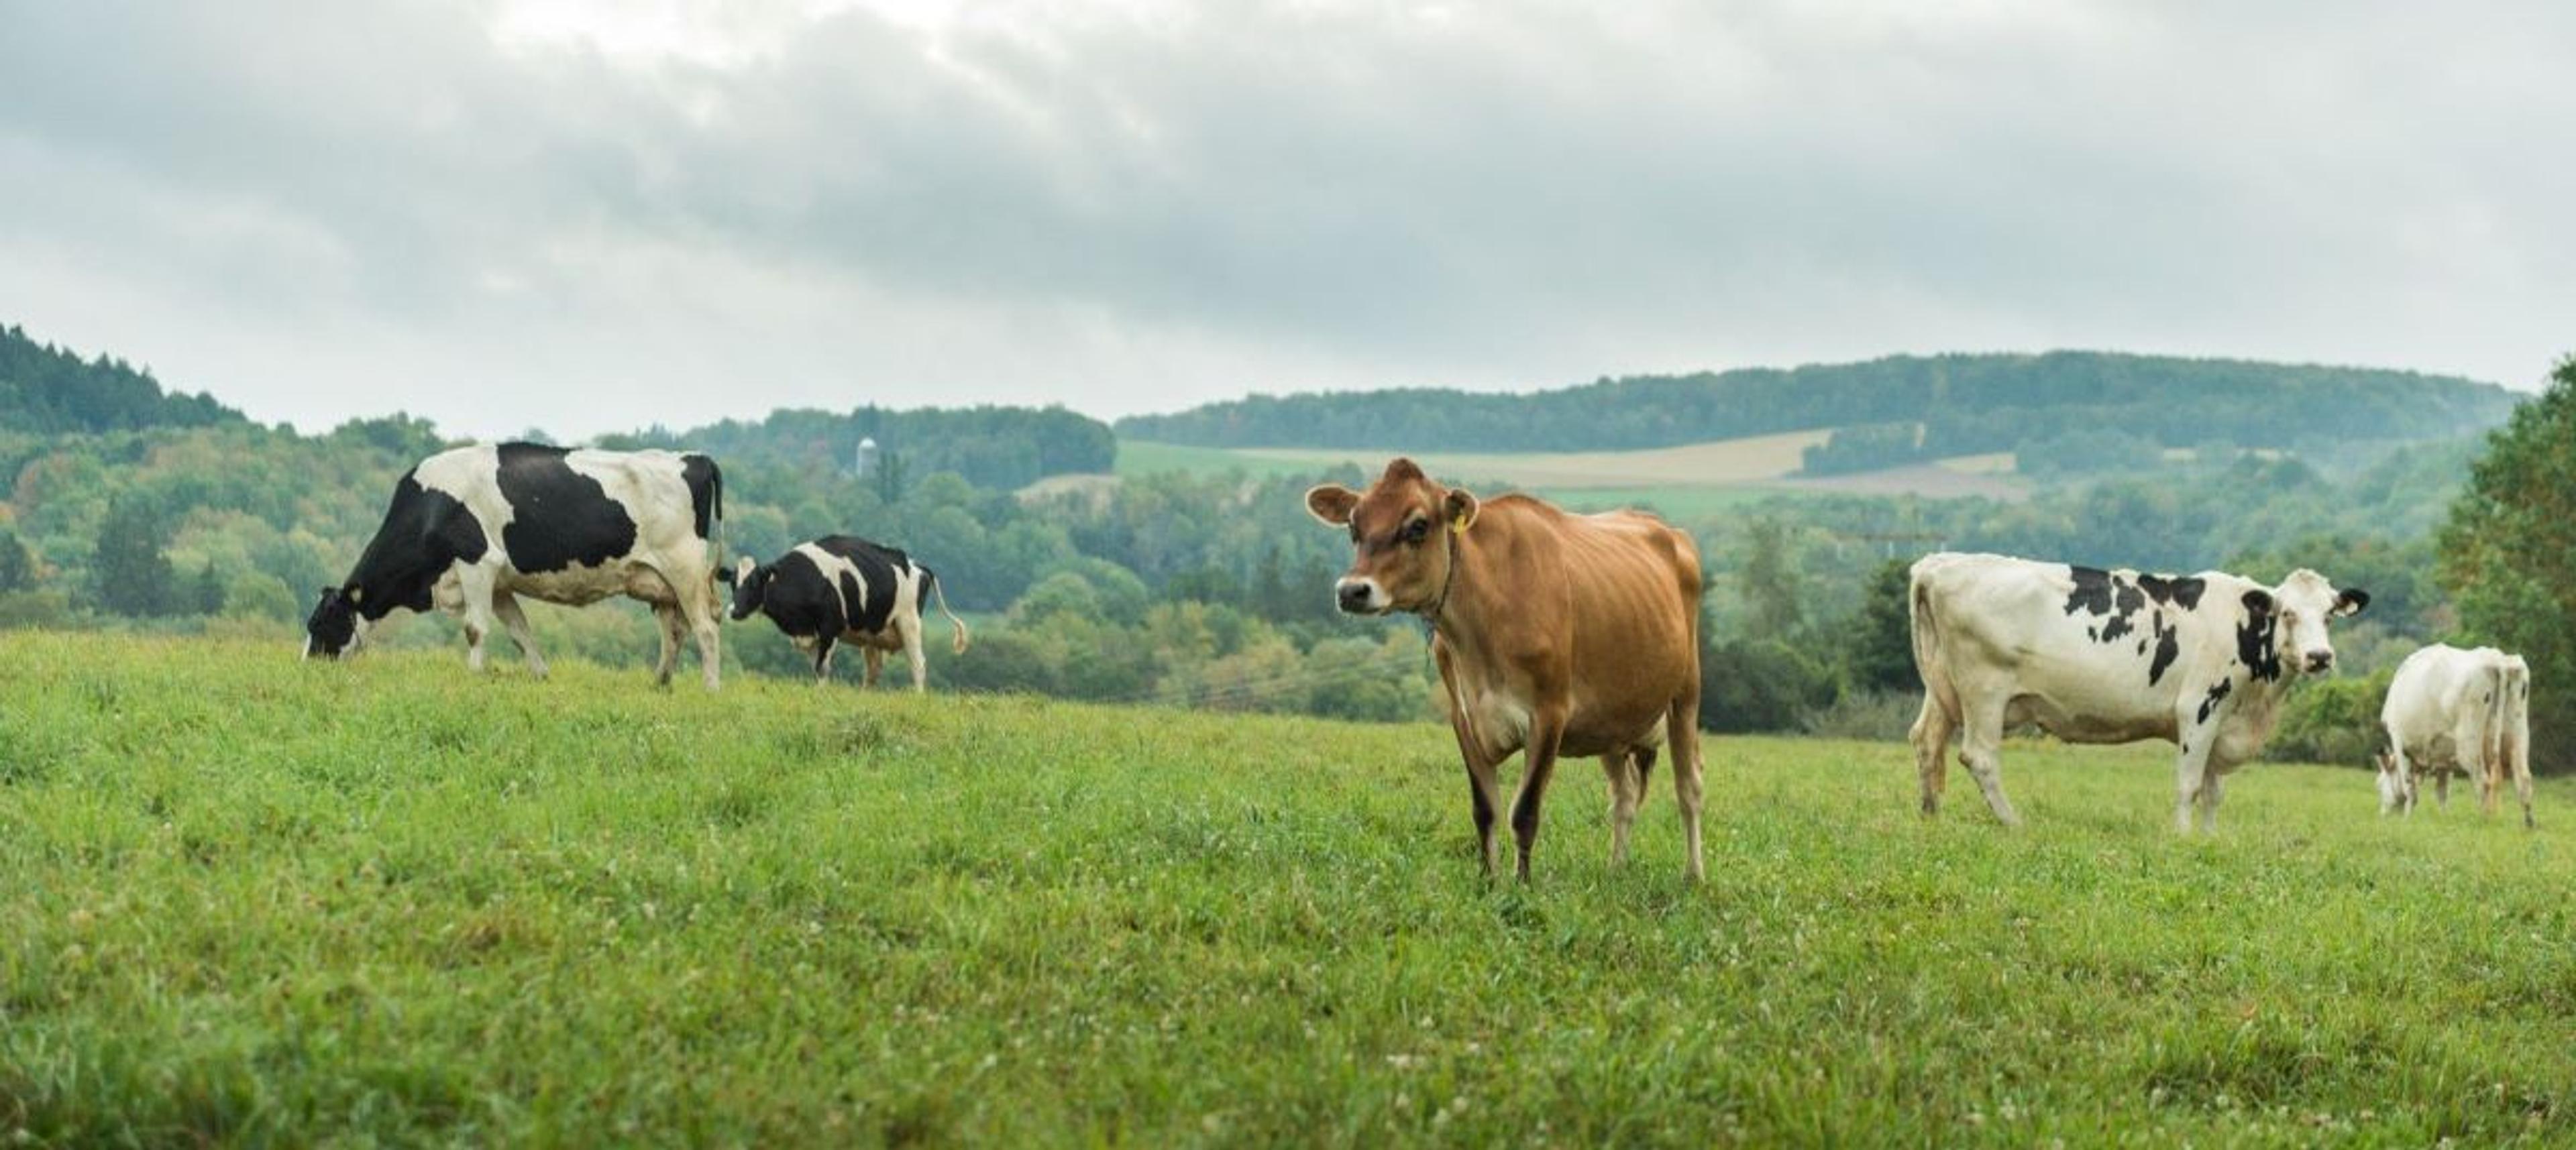 Cows graze at the Miller family farm in New York.